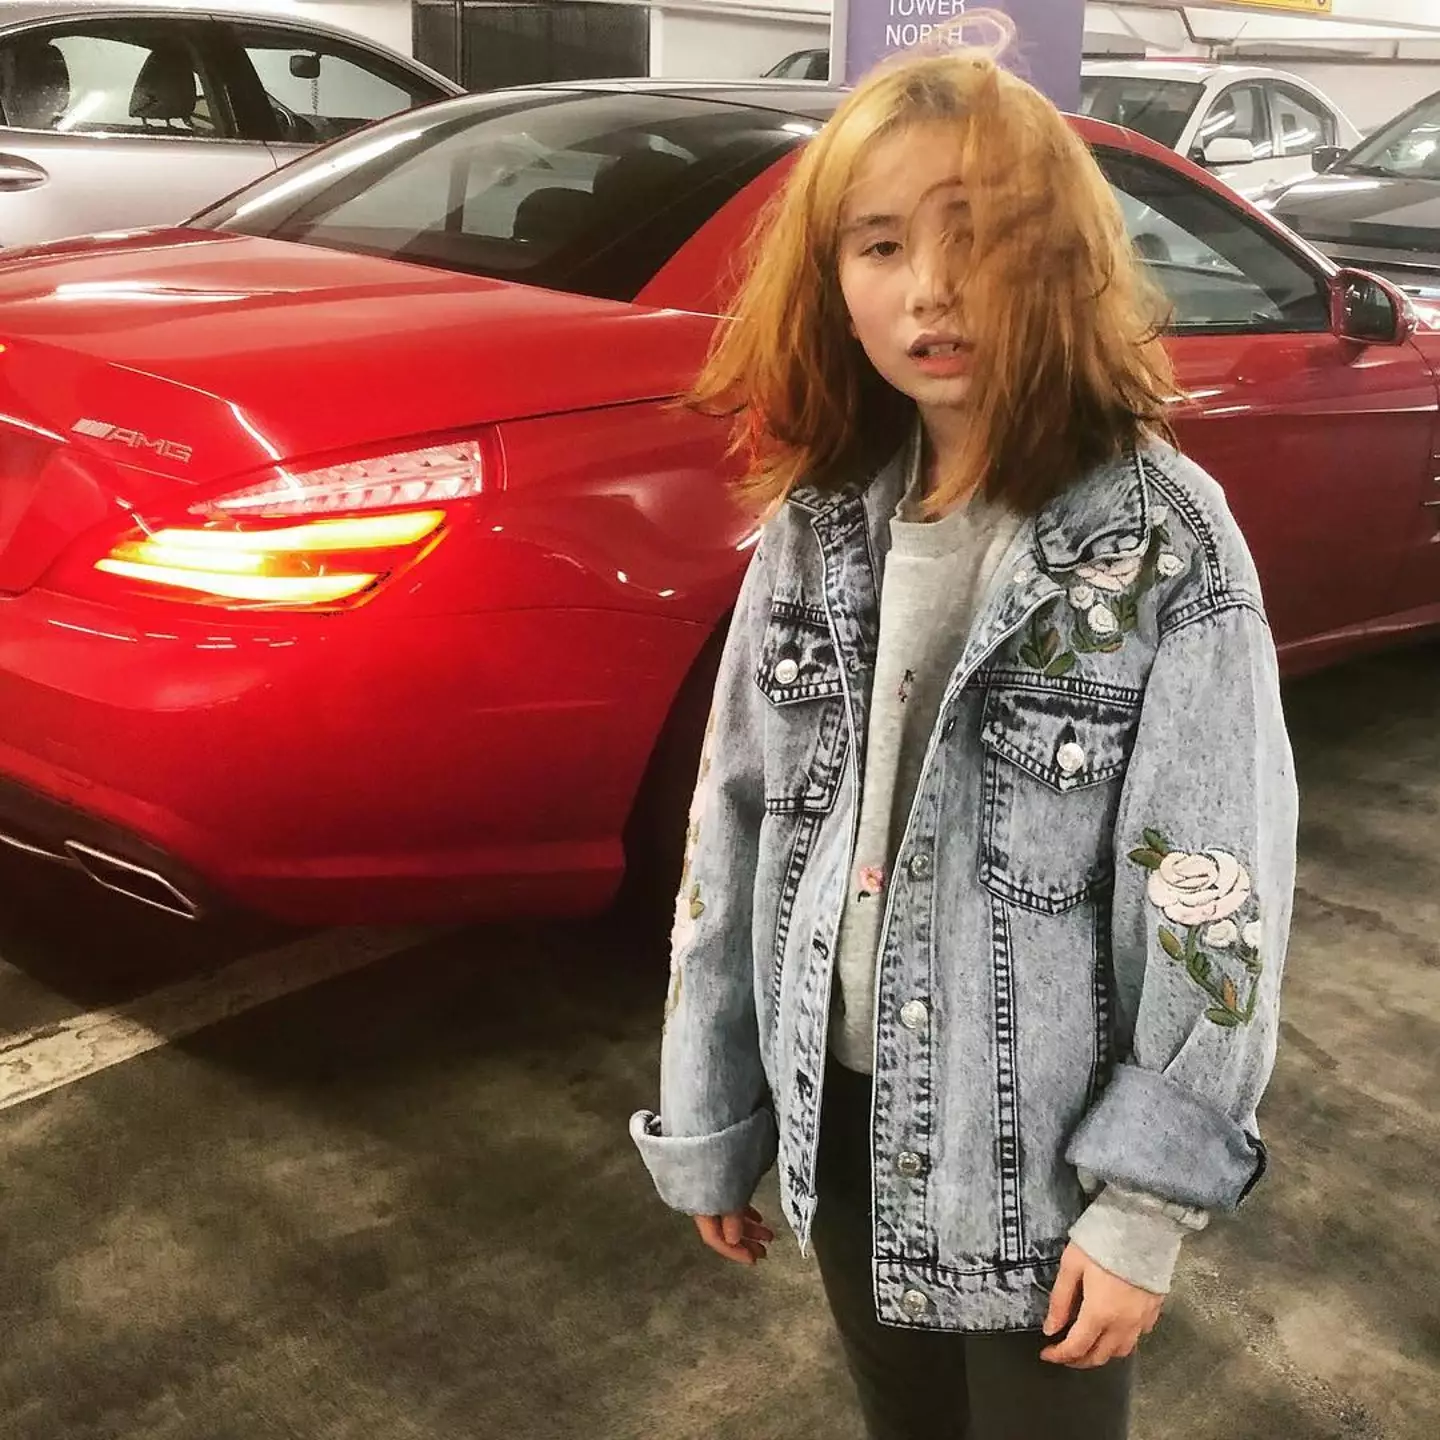 There were reports in August that Lil Tay had died.